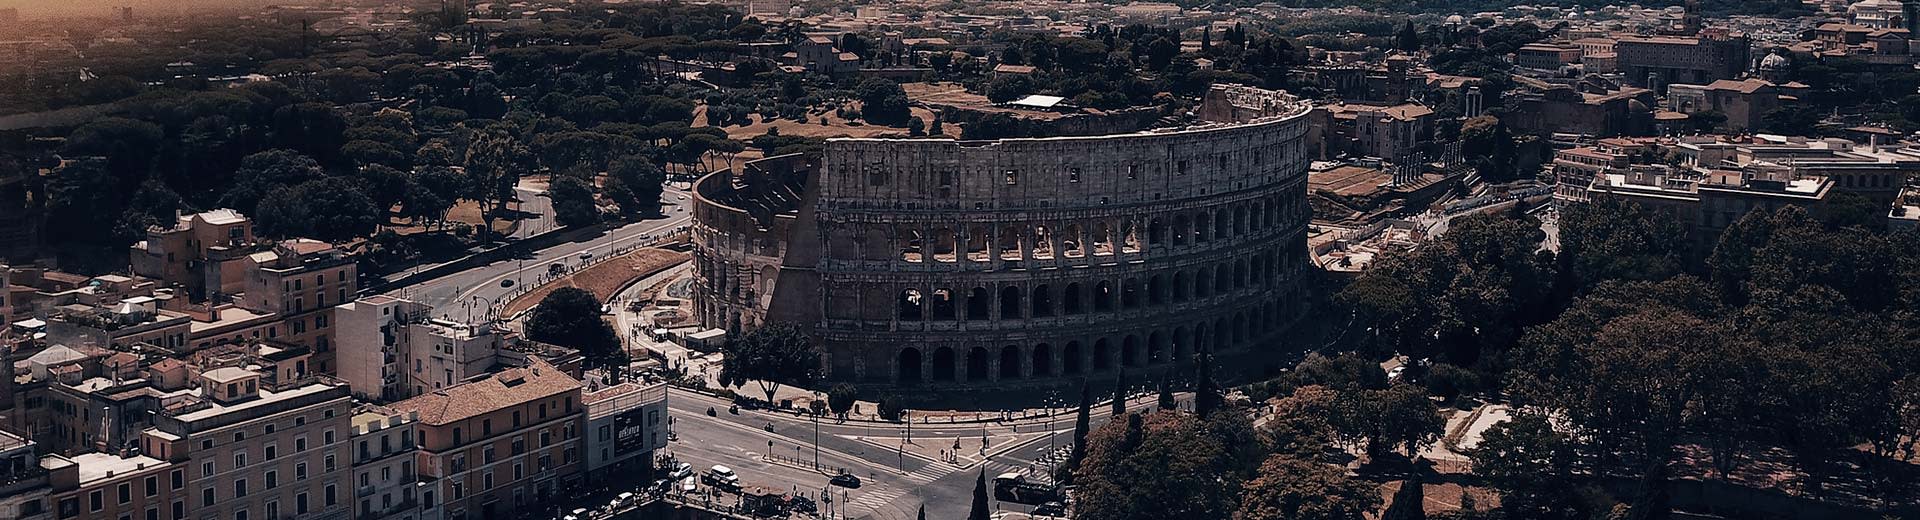 In the half-light of dusk or dawn, the famous Colosseum of Rome dominates the image, surrounded by buildings.